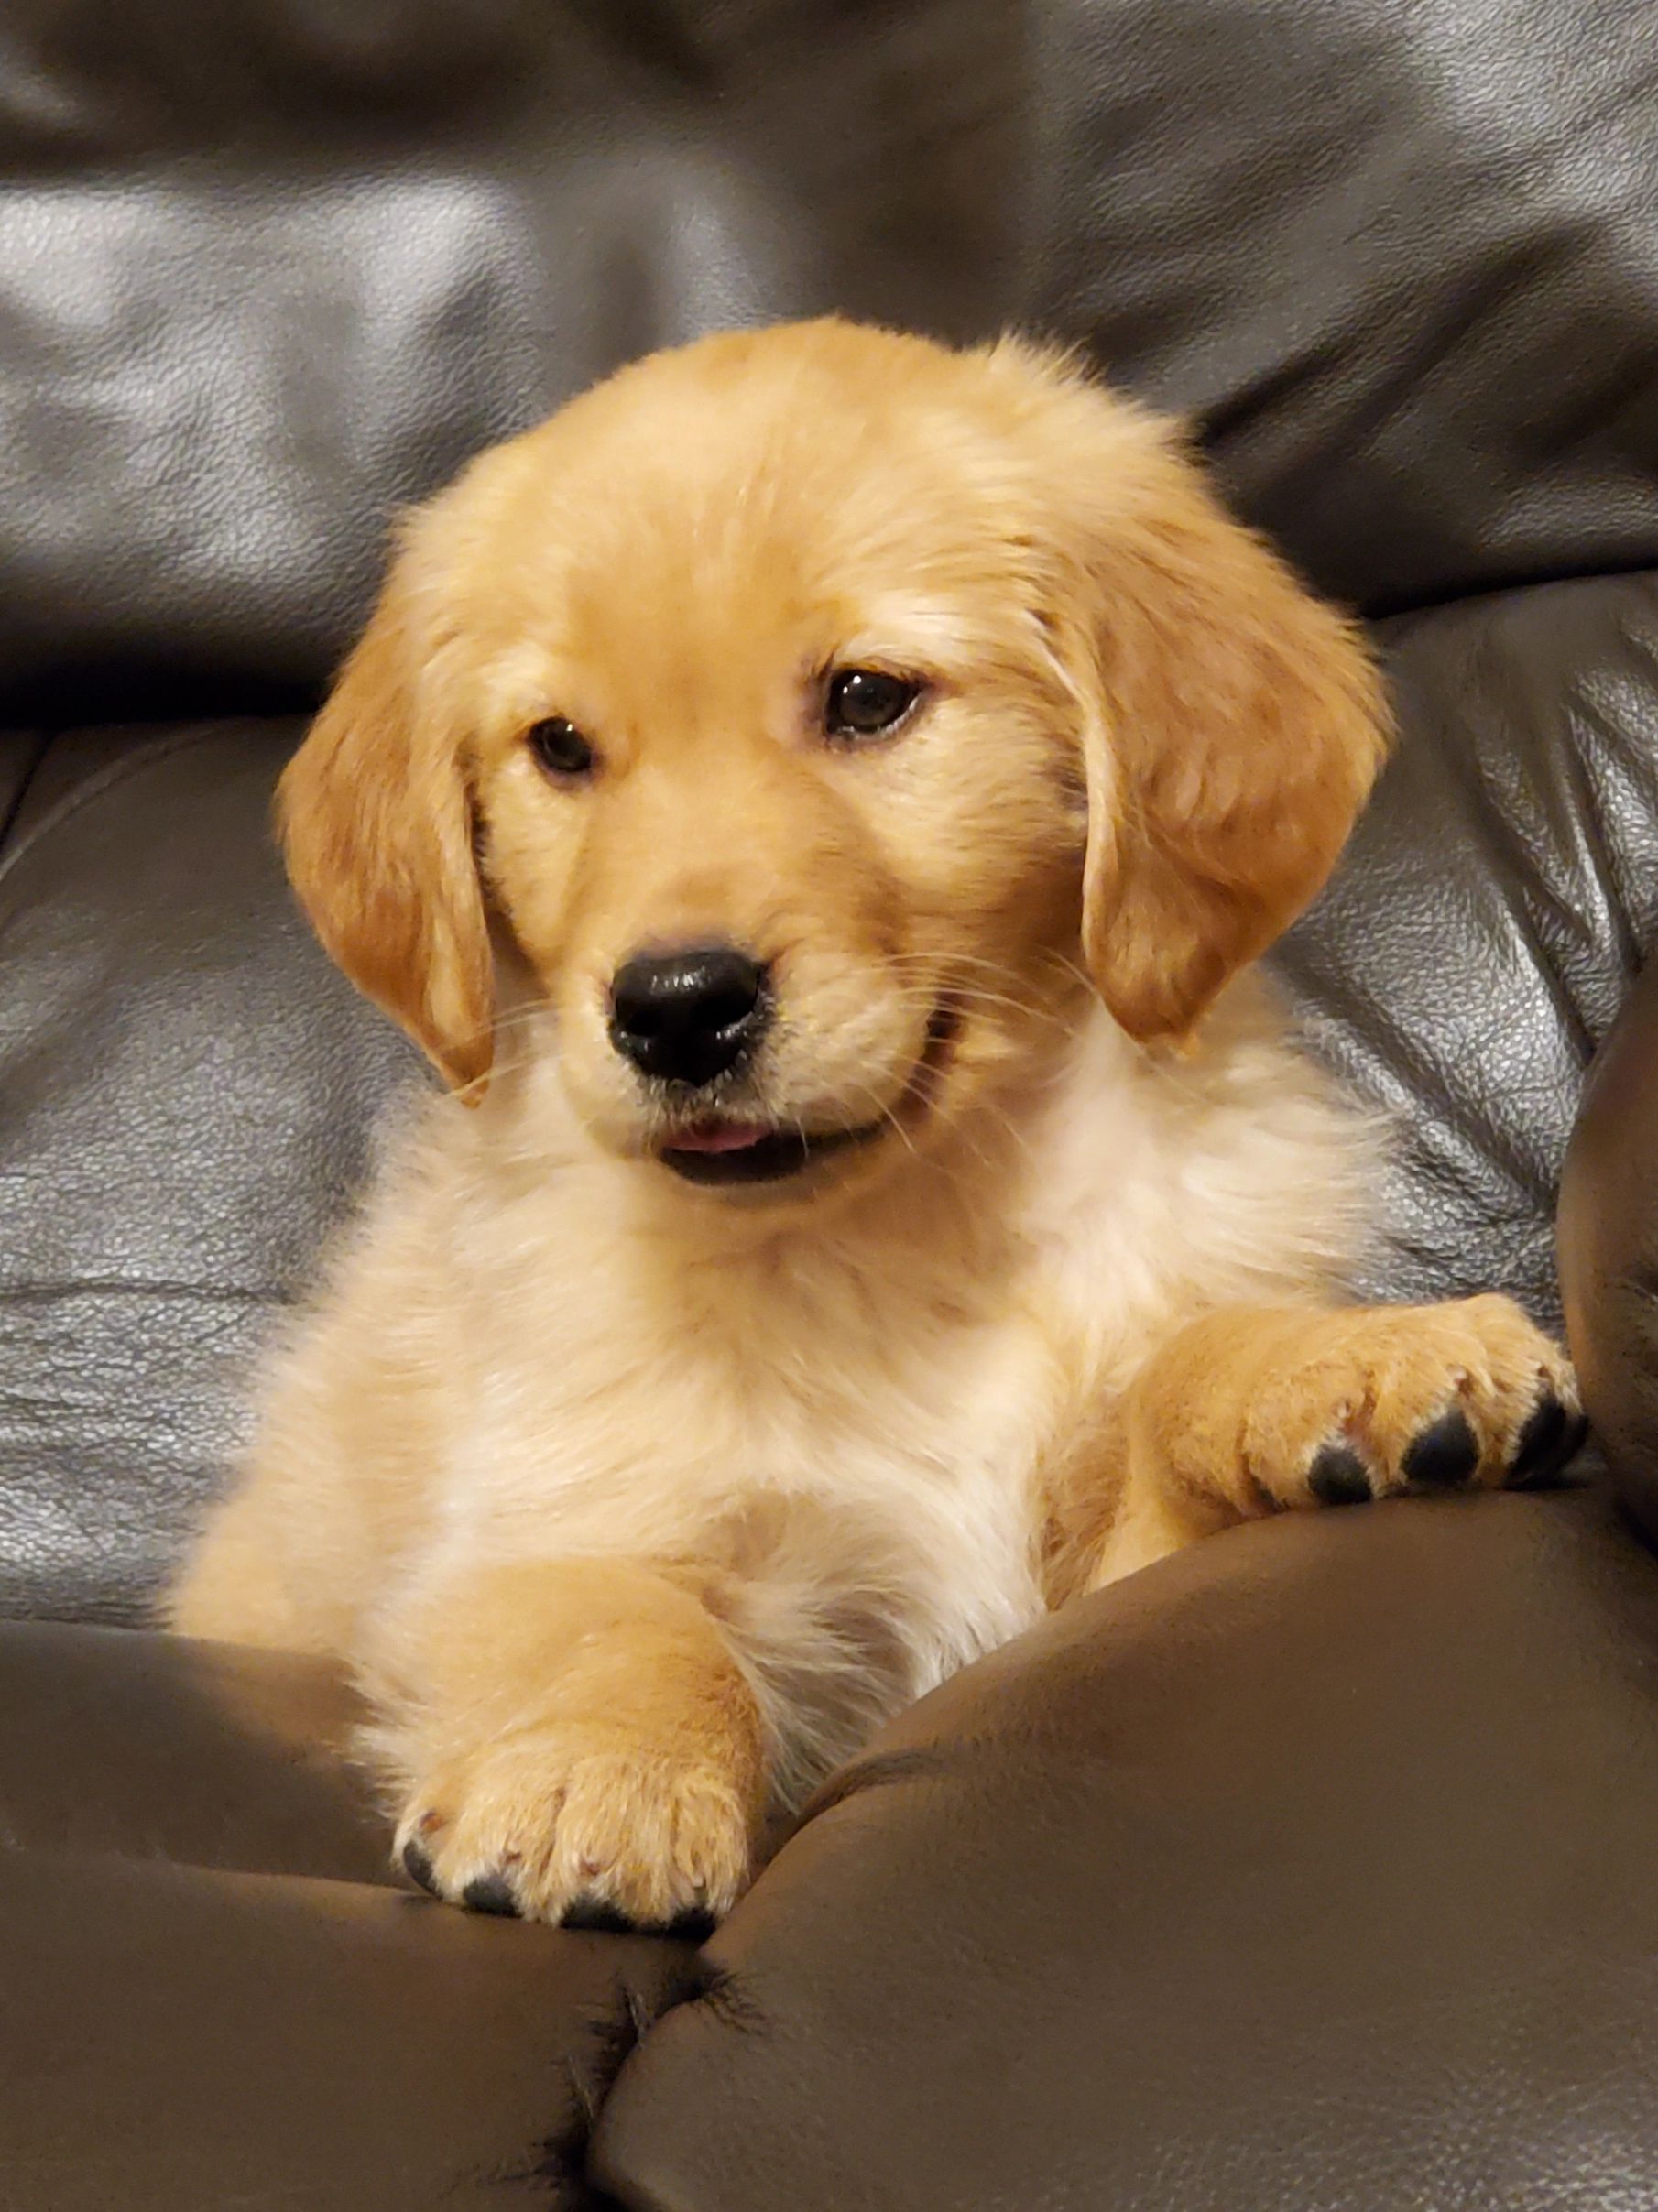 Walker Hollow Golden Retrievers: Elite Golden Retriever Puppies: We raise Golden  Retrievers because we love this breed and are committed to quality not  quantity puppies. We are small country raised breeder in